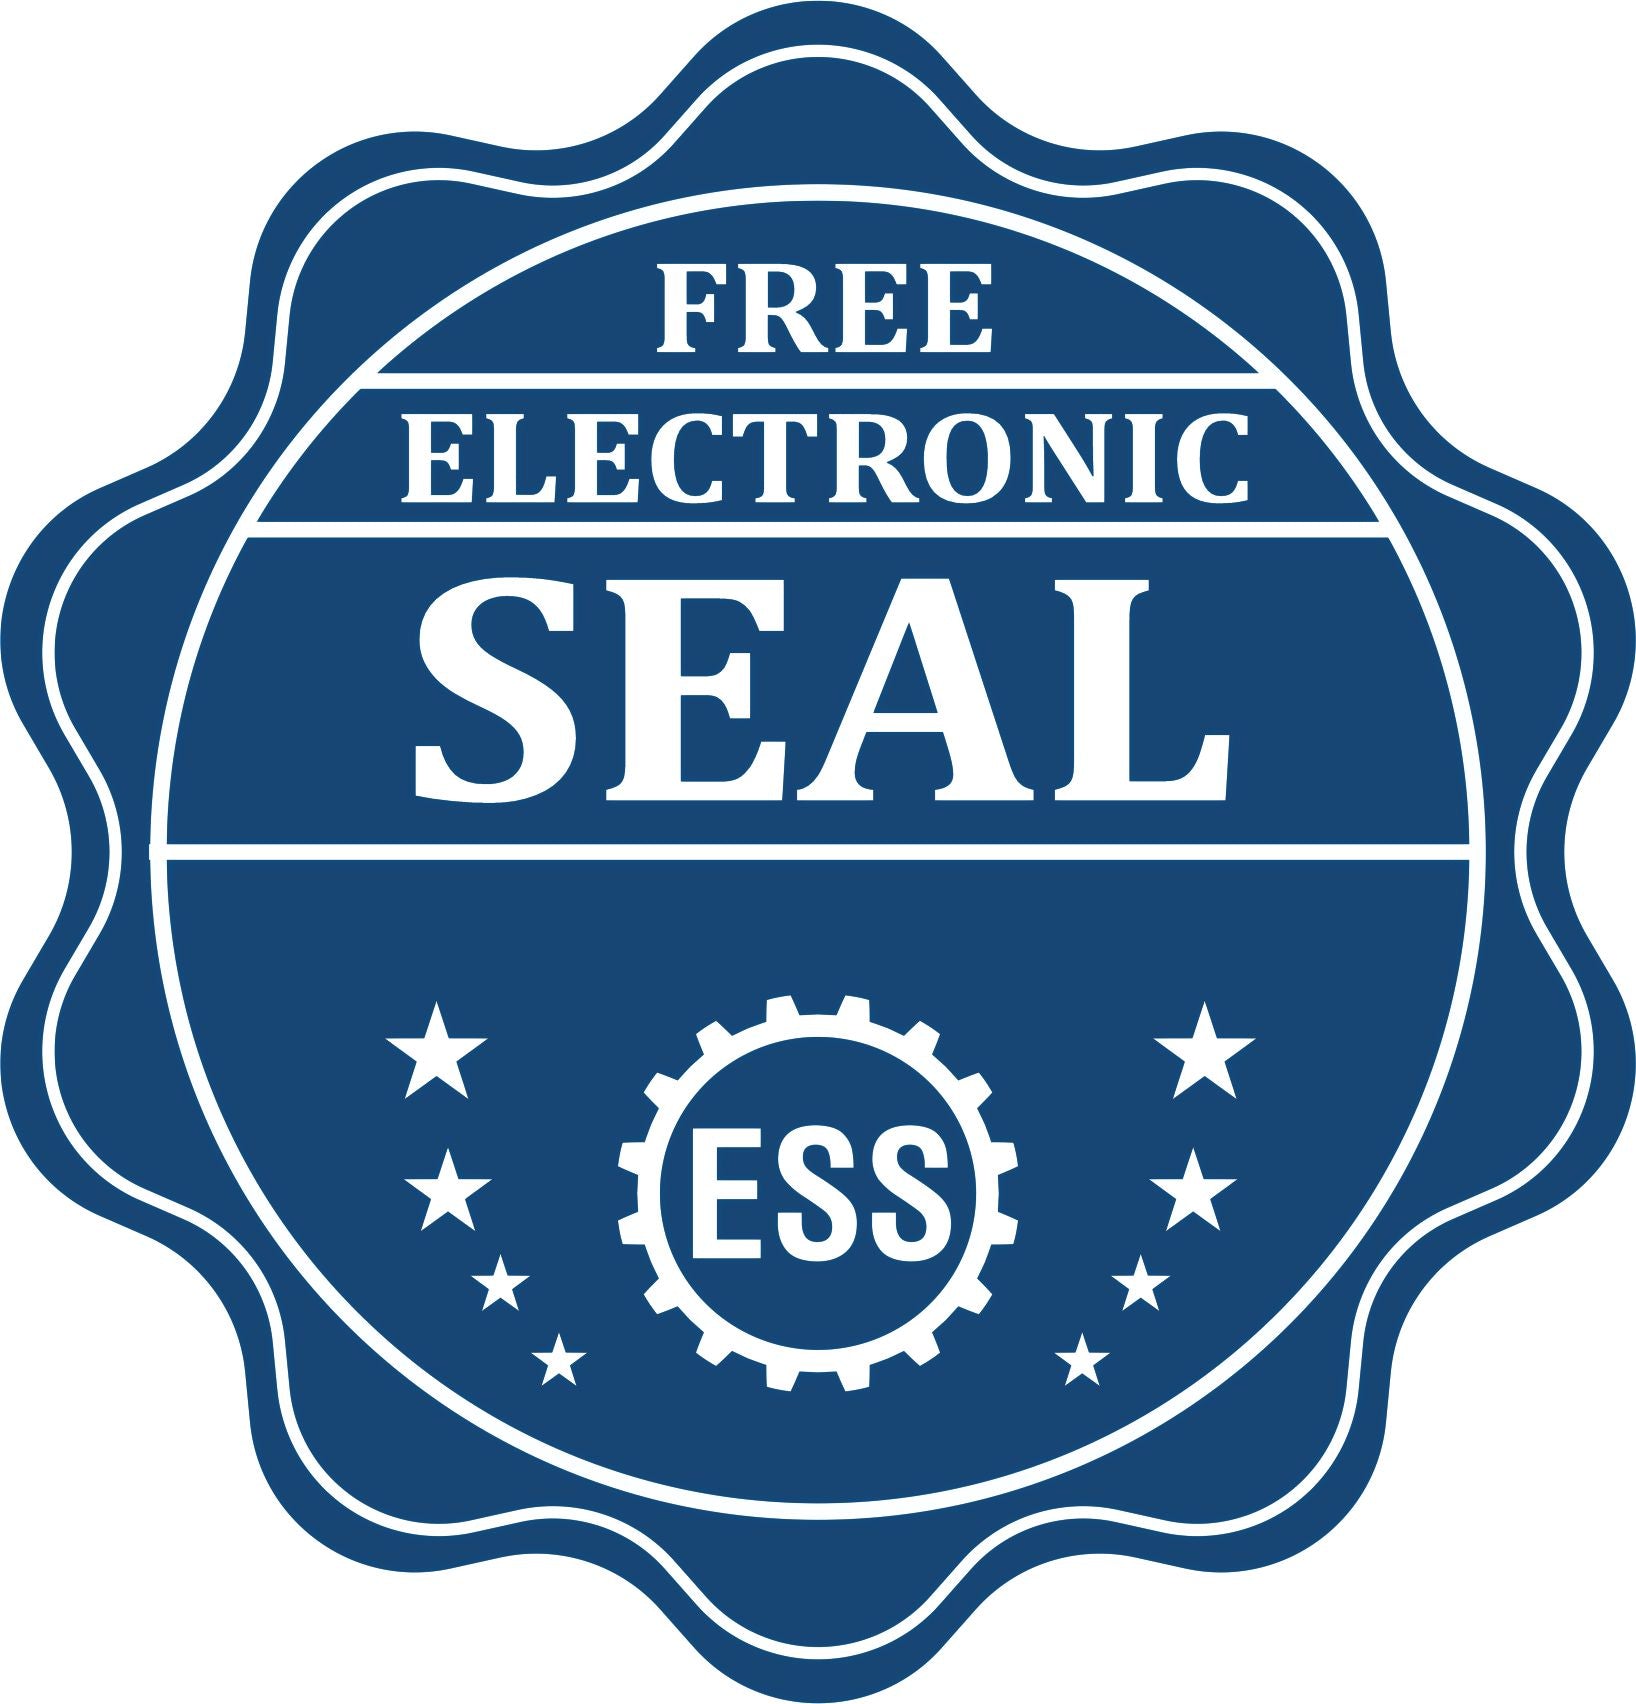 A badge showing a free electronic seal for the Premium MaxLight Pre-Inked Tennessee Geology Stamp with stars and the ESS gear on the emblem.